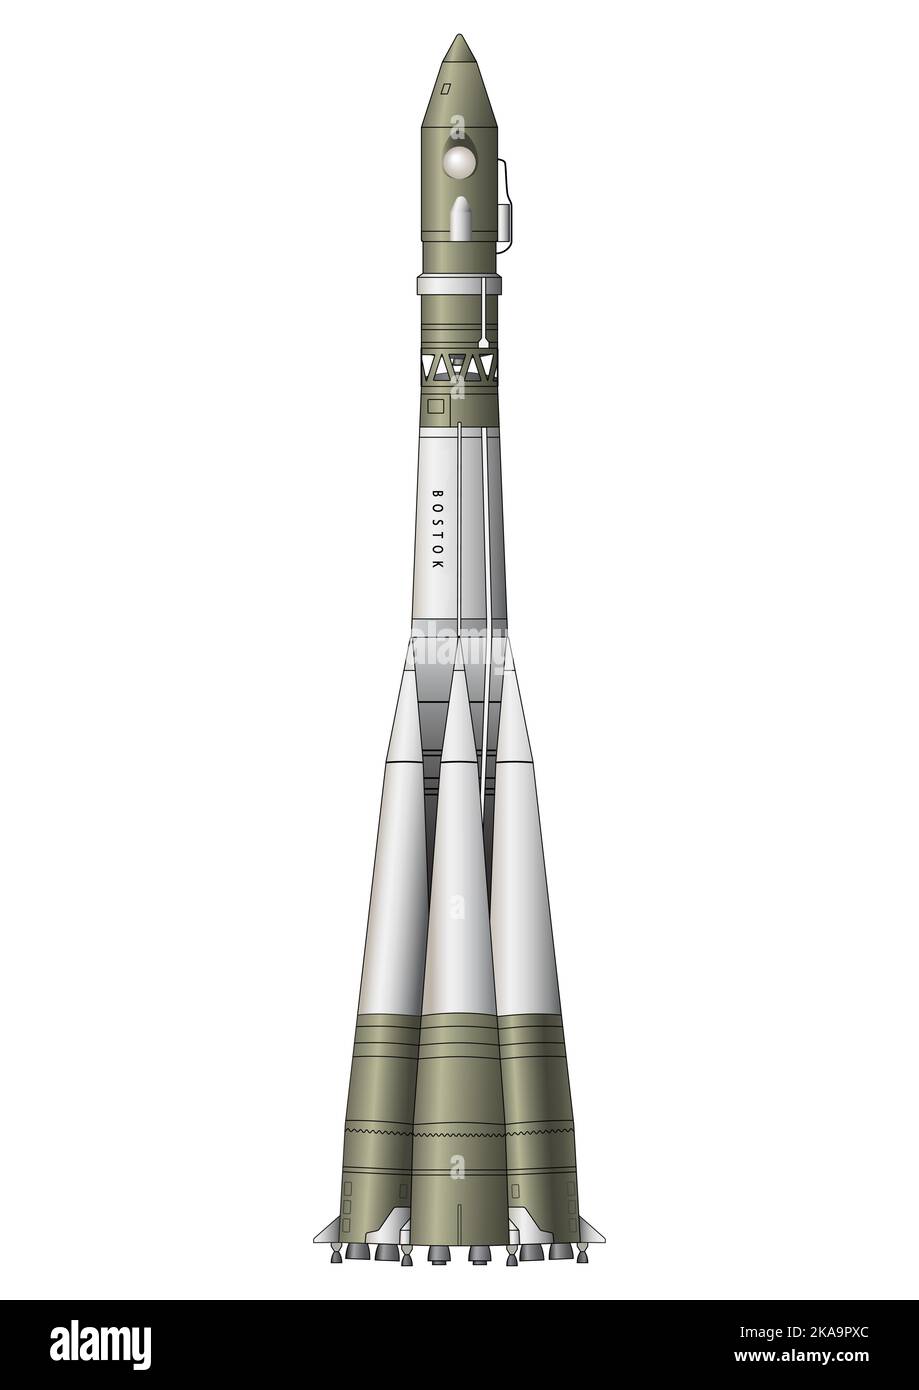 Vostok 1 - the first rocket that transported man into space Stock Vector